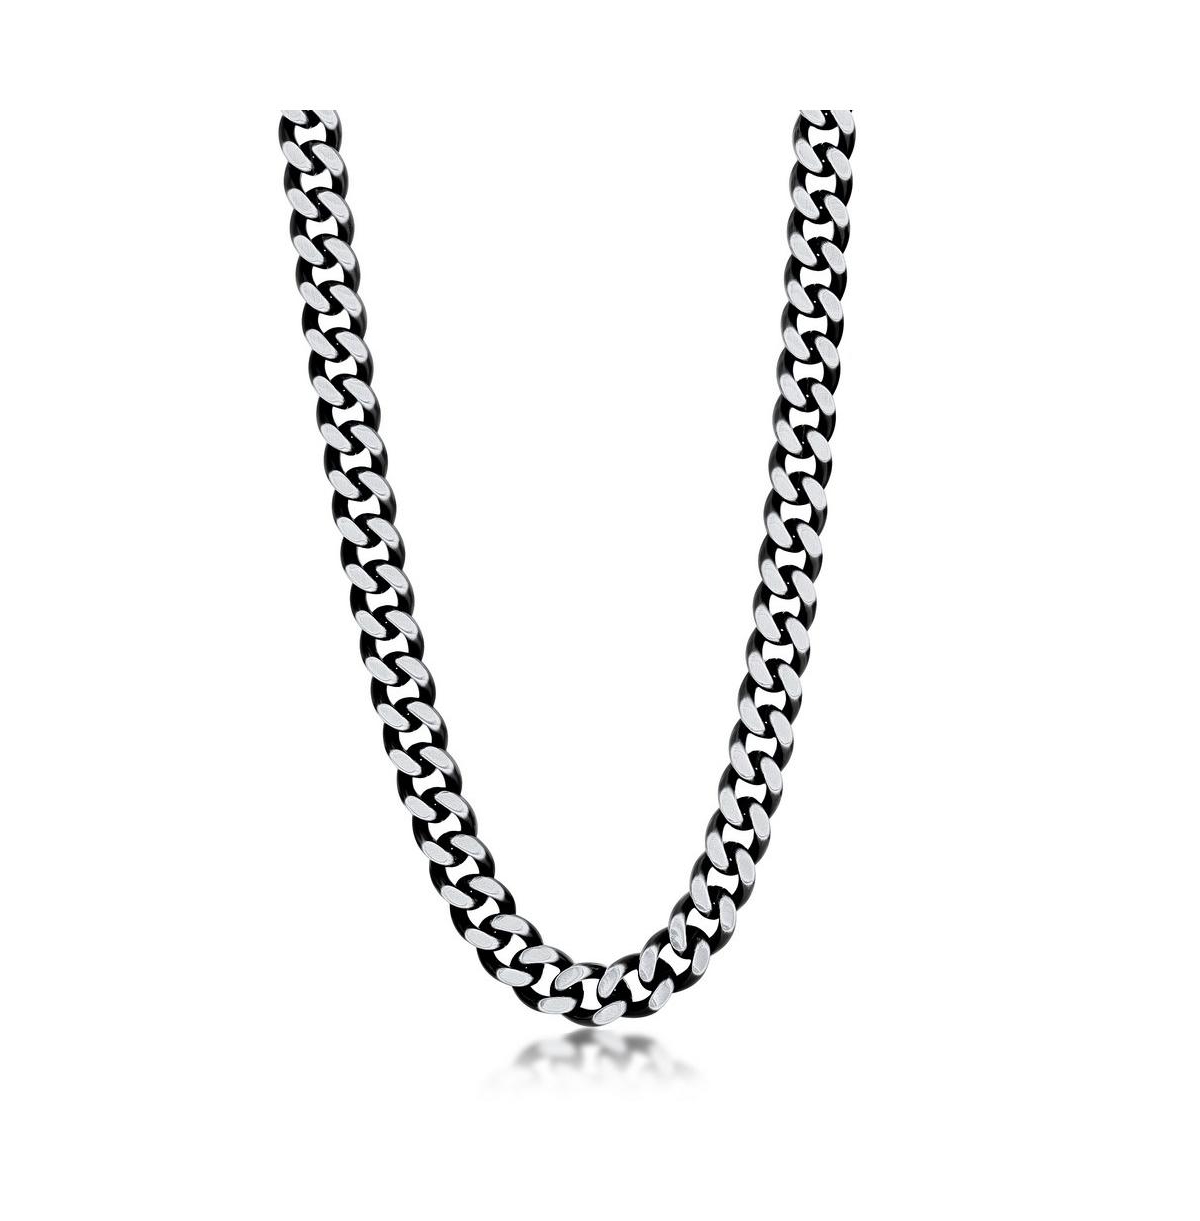 Stainless Steel Cuban Chain Necklace - Black